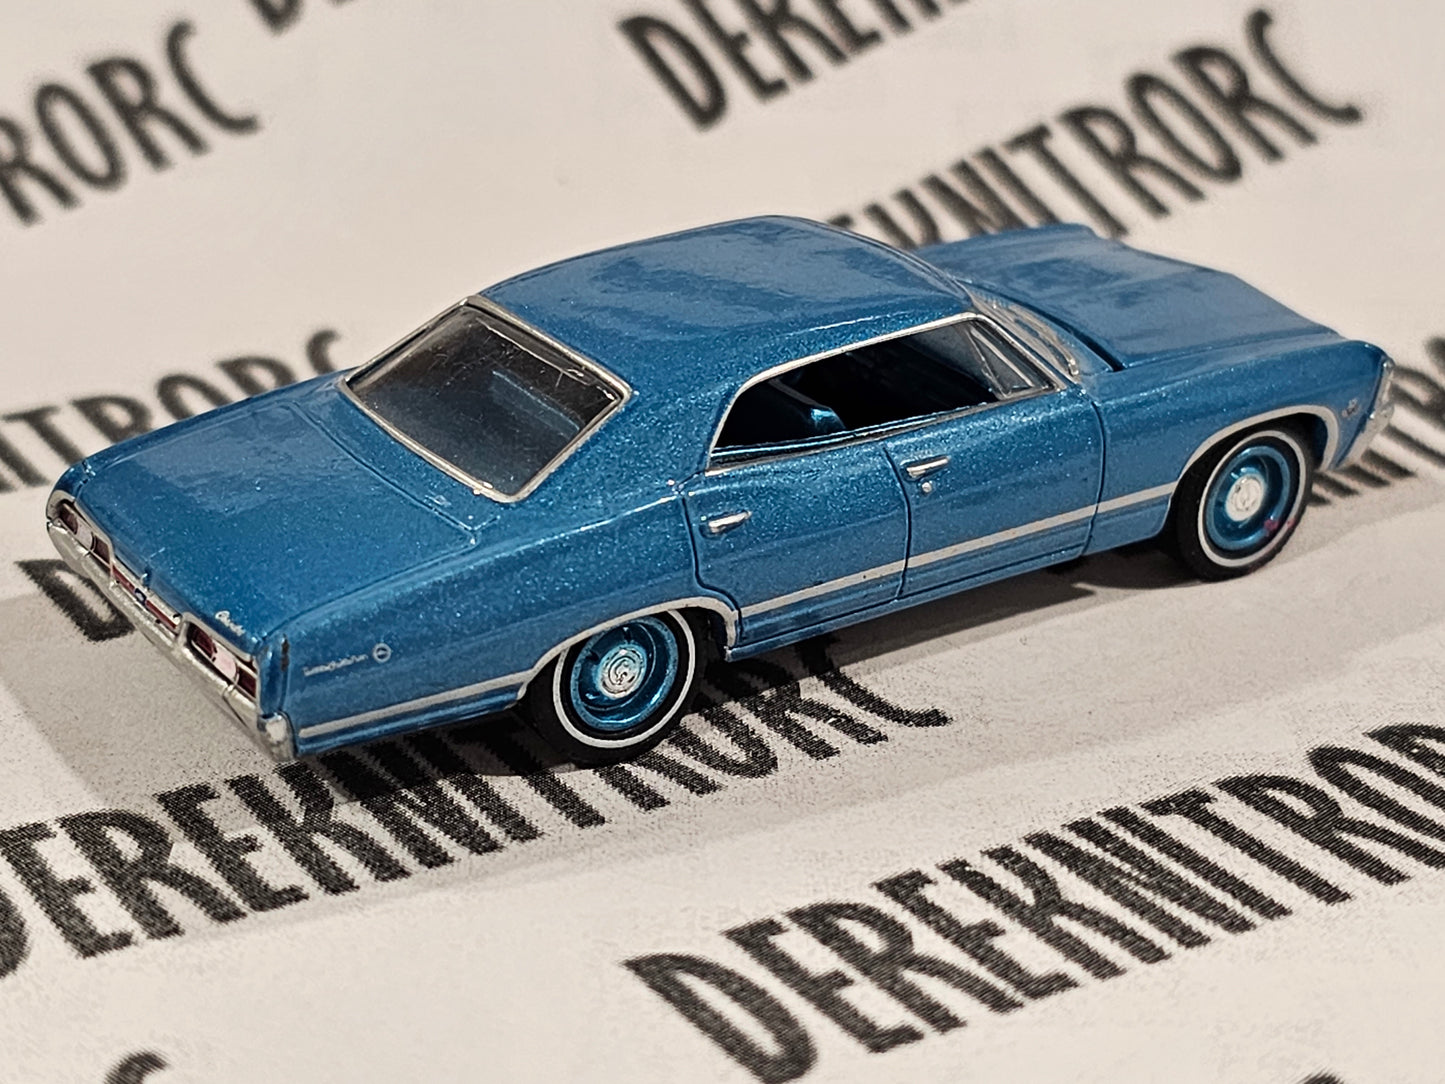 NOT FOR SALE GreenLight Collectibles Deco Sample 1967 Chevy Impala Sport Sedan